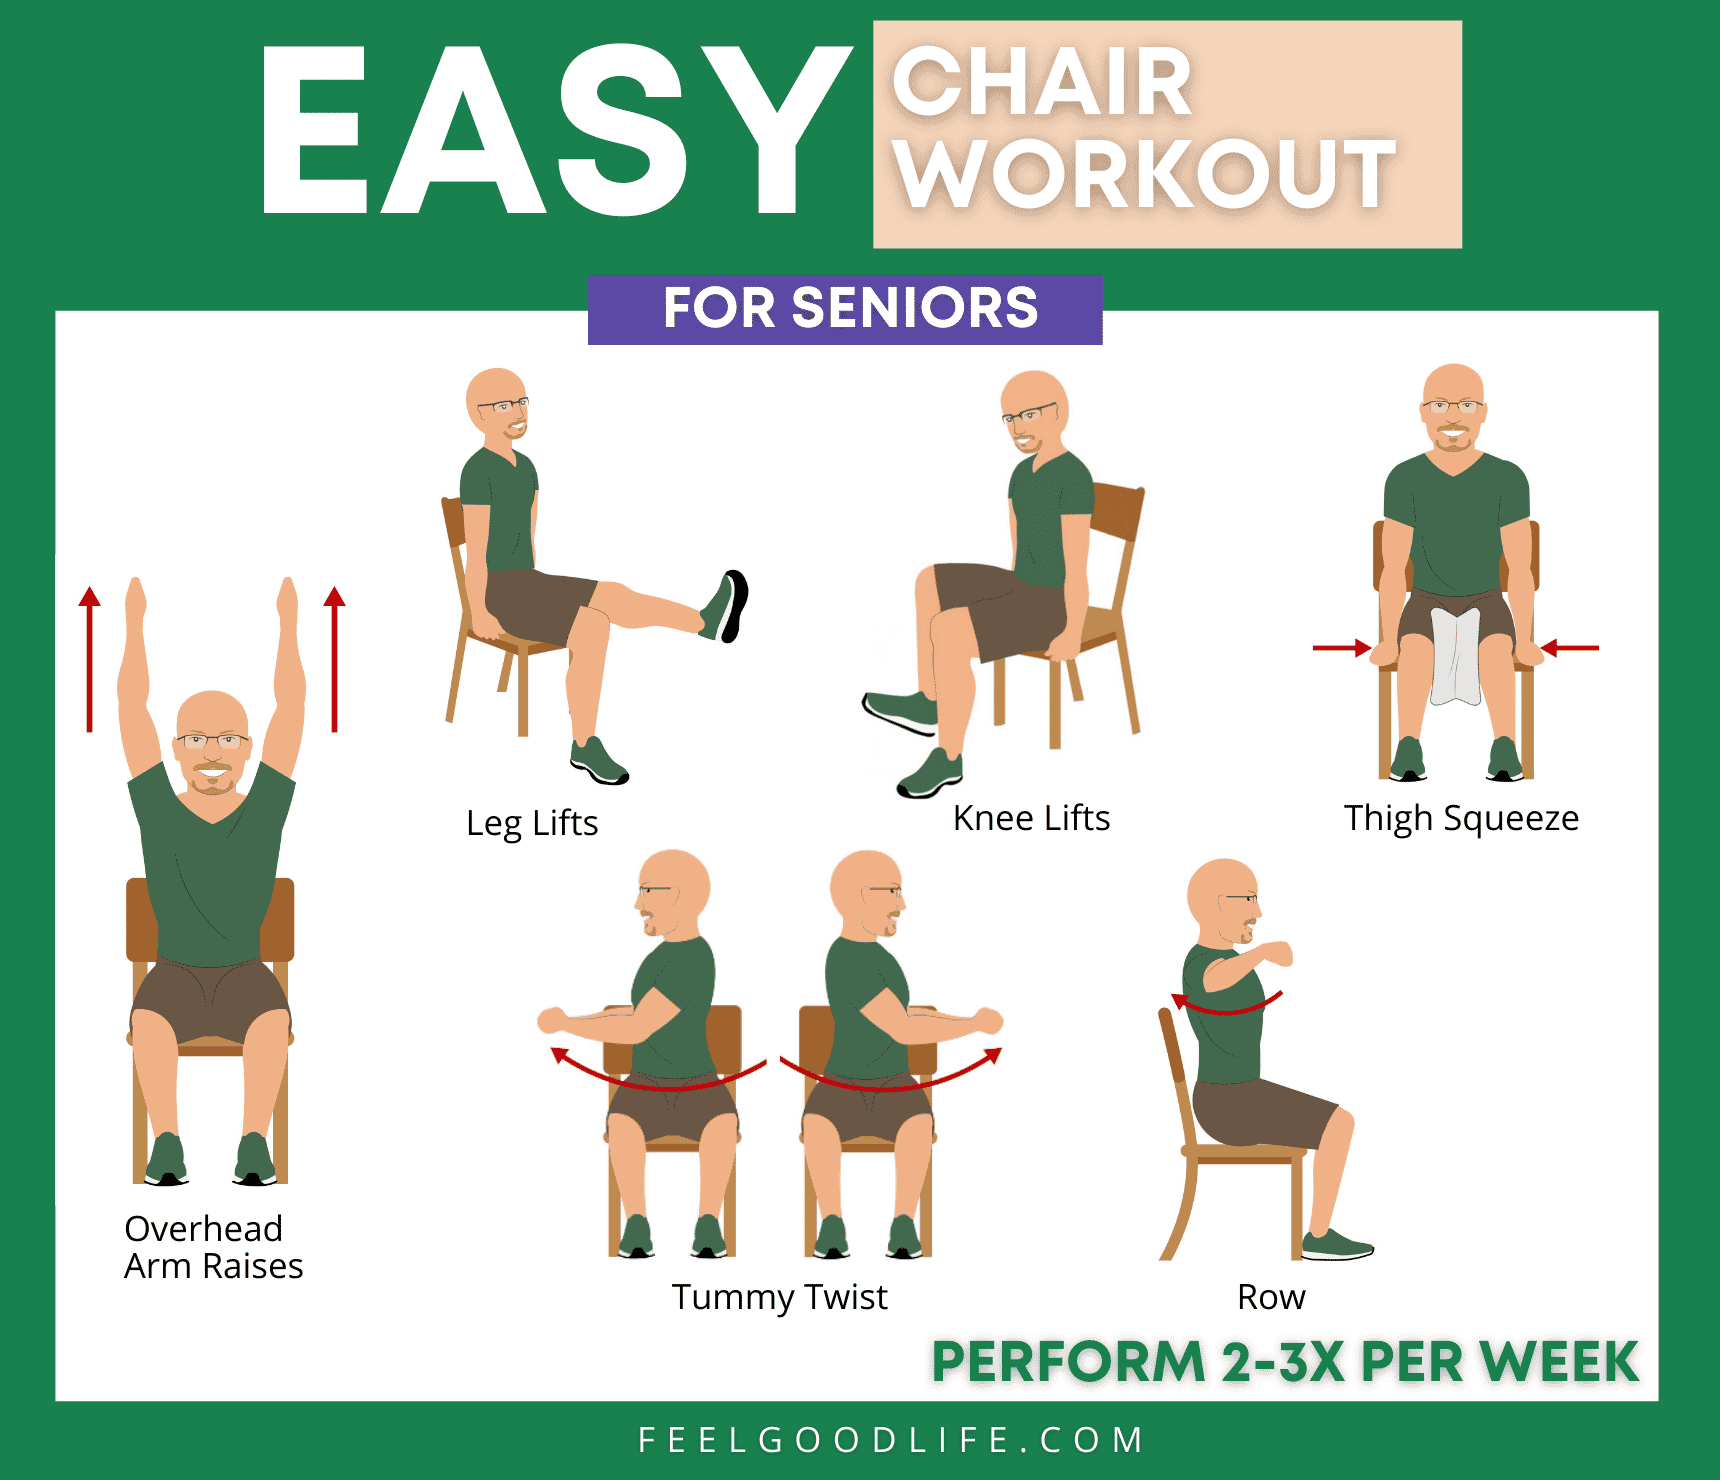 Easy chair workout routine for seniors